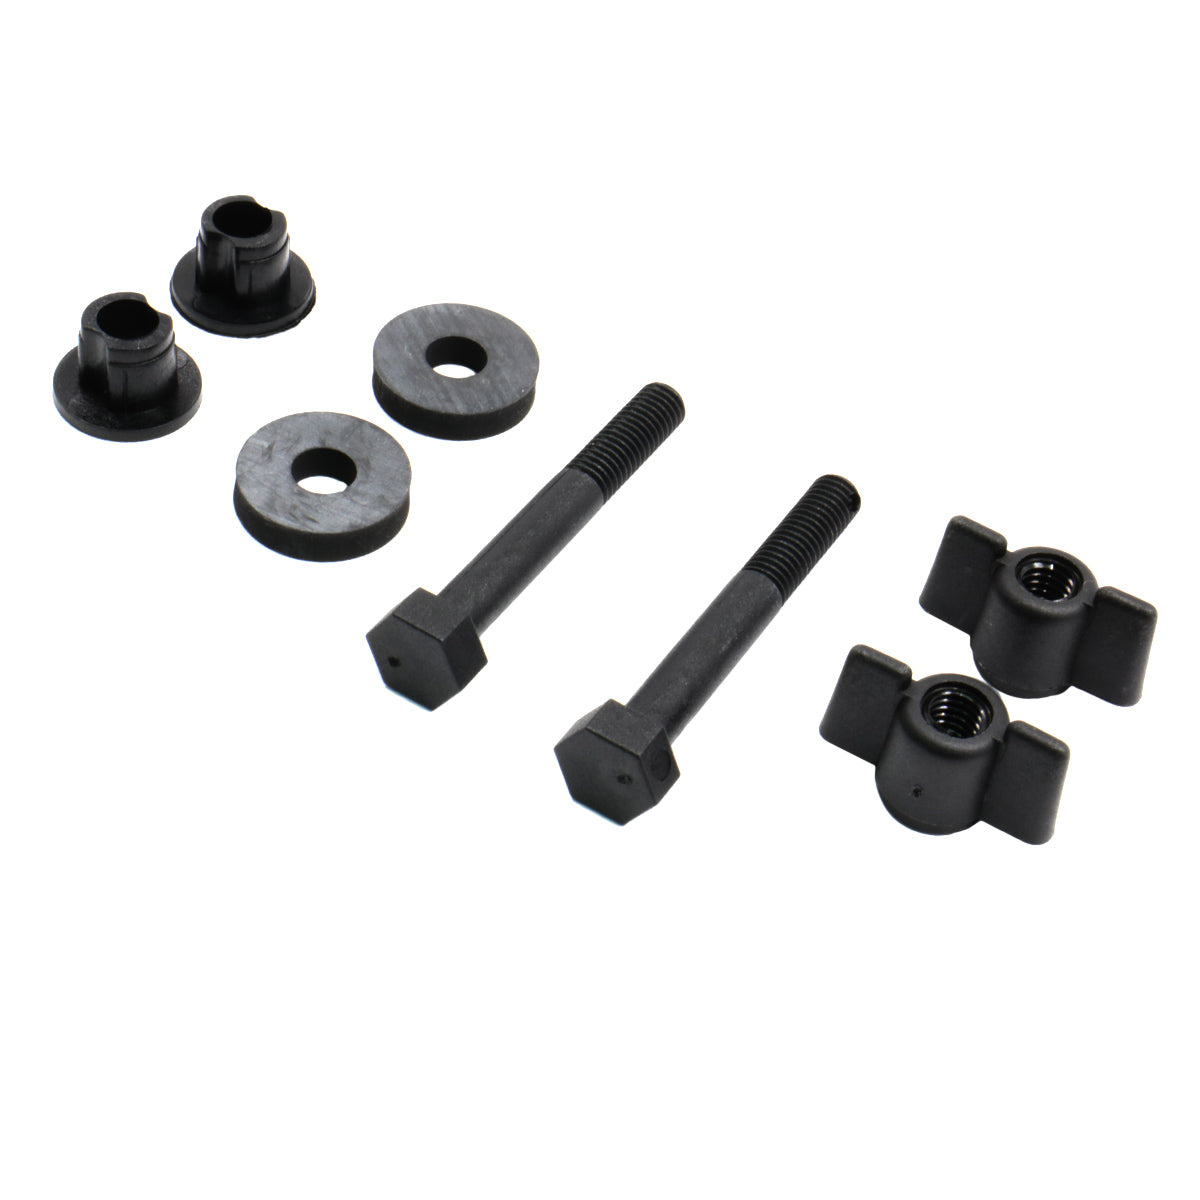 XP DEUS and ORX Metal Detector Hardware Kit for Search Coil